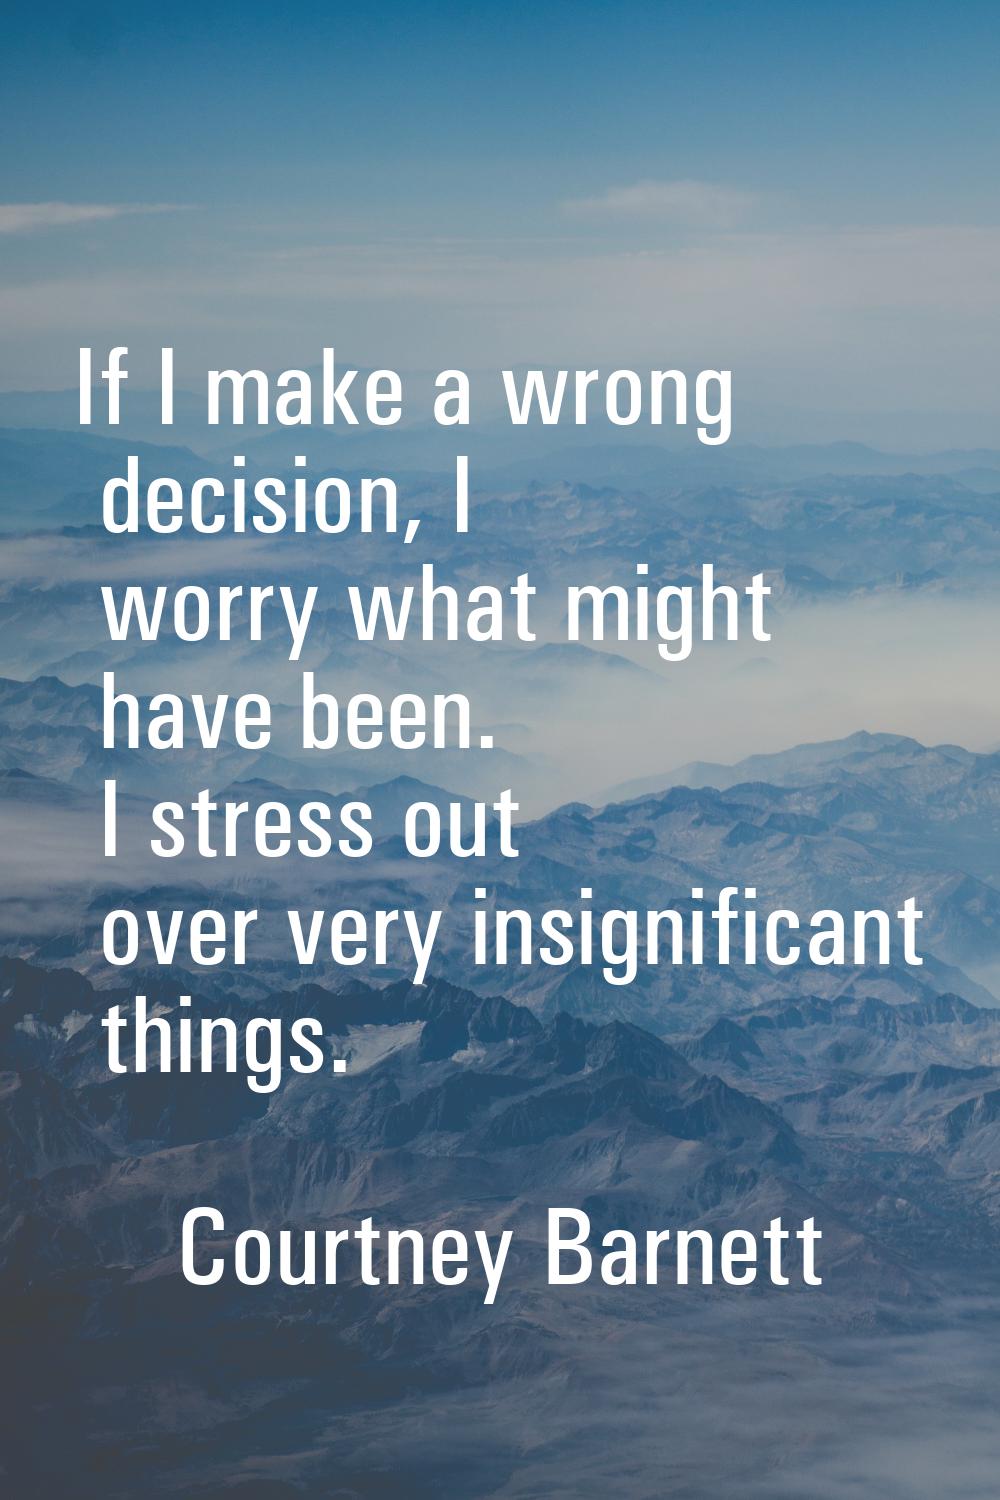 If I make a wrong decision, I worry what might have been. I stress out over very insignificant thin